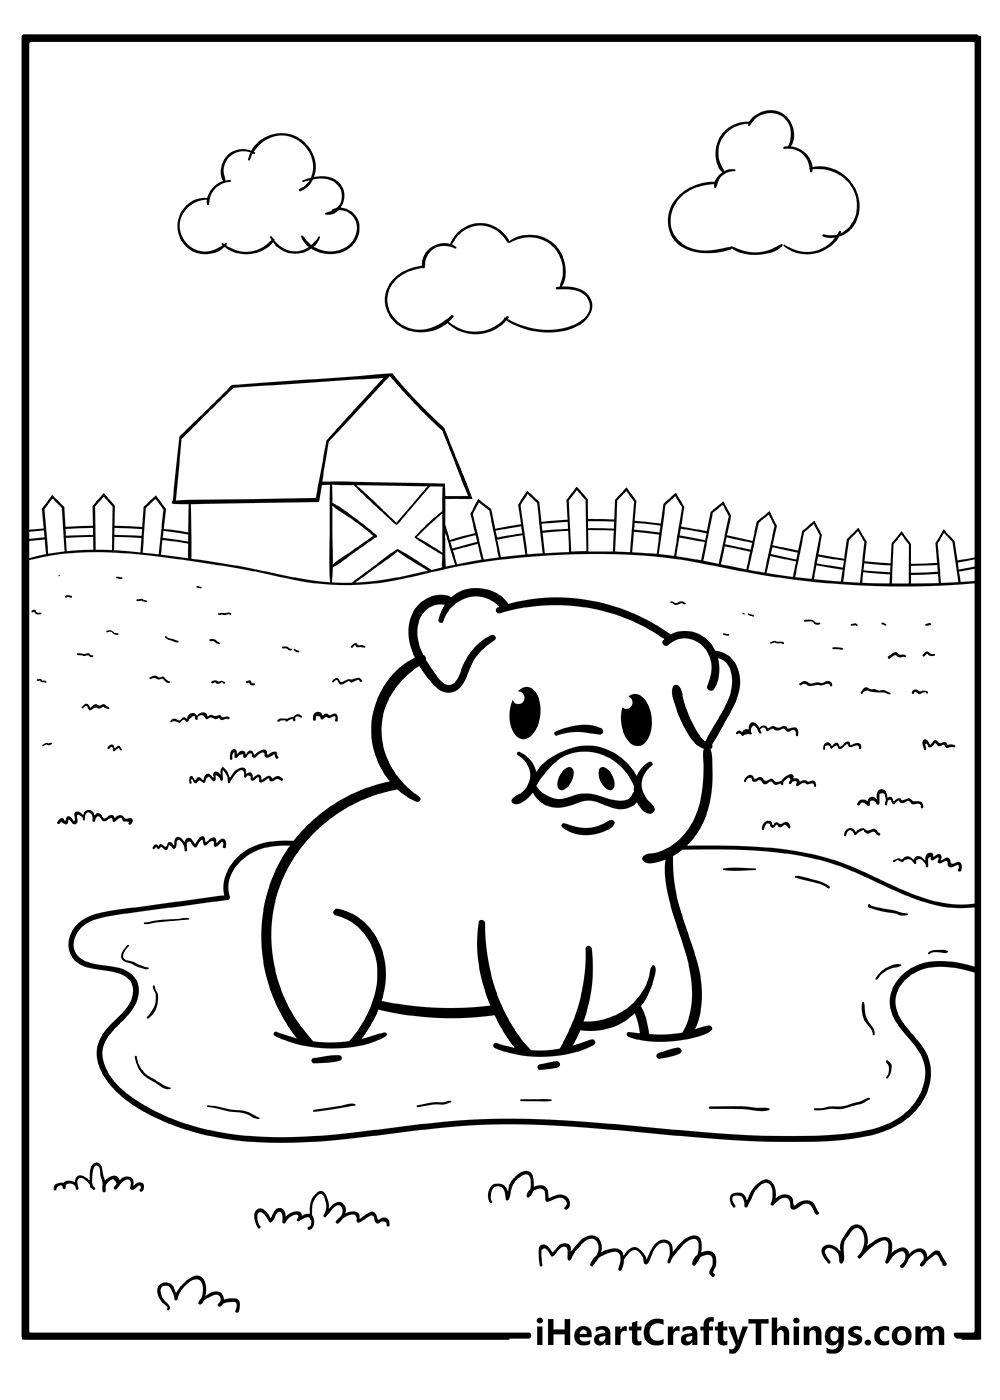 Farm Animal Coloring Pages for kids free download